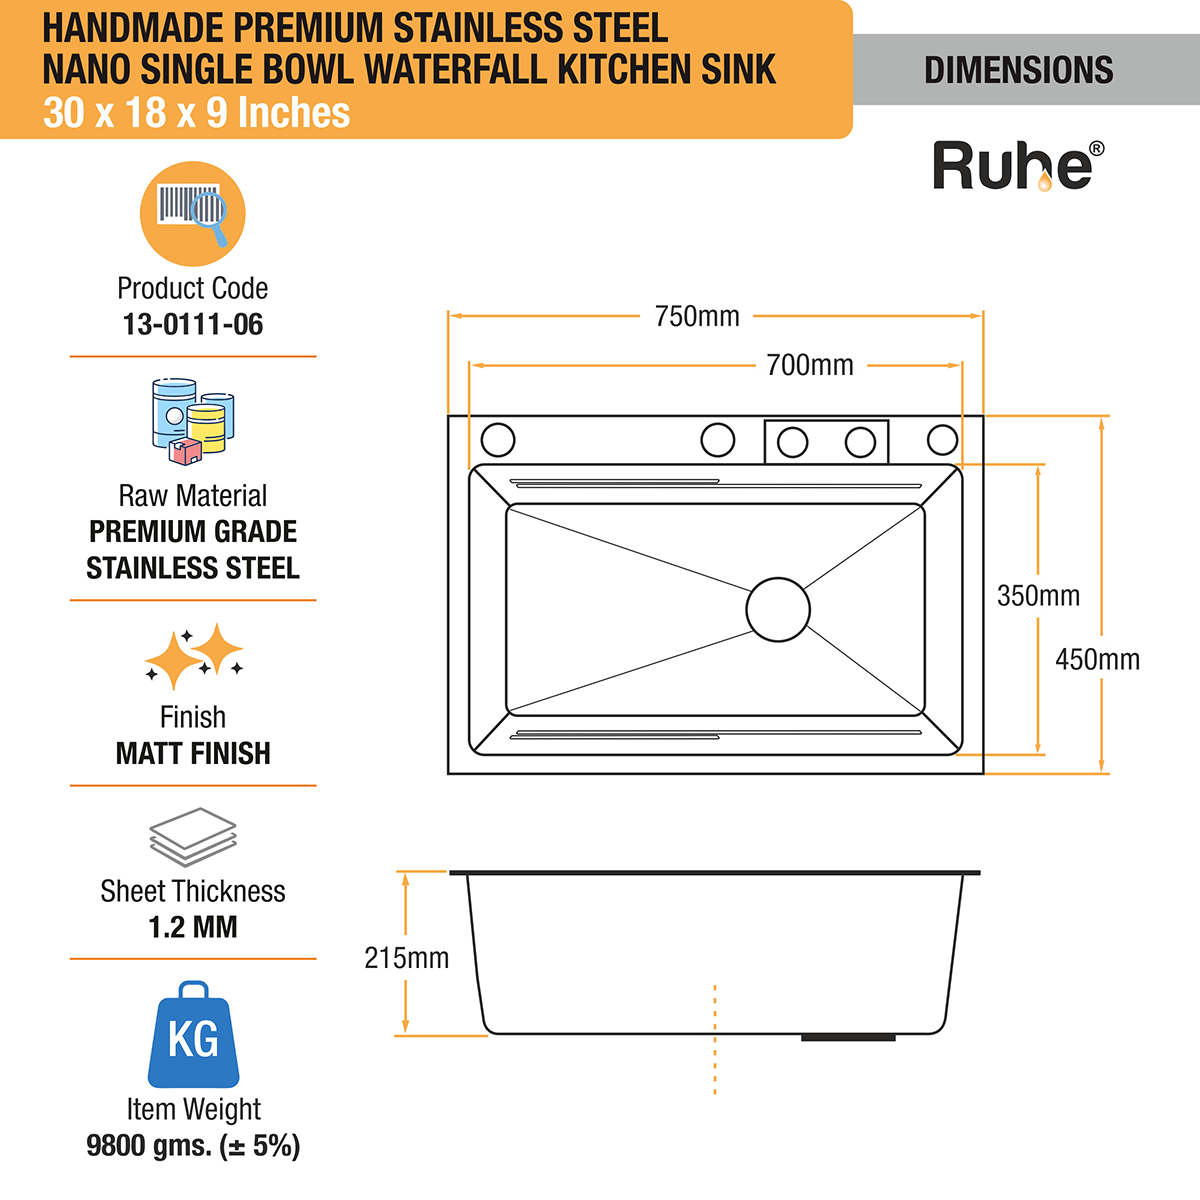  Handmade Premium Nano Kitchen Sink with Integrated Waterfall, Pull-Out & RO Faucet (30 x 18 x 9 Inches)  Dimensions